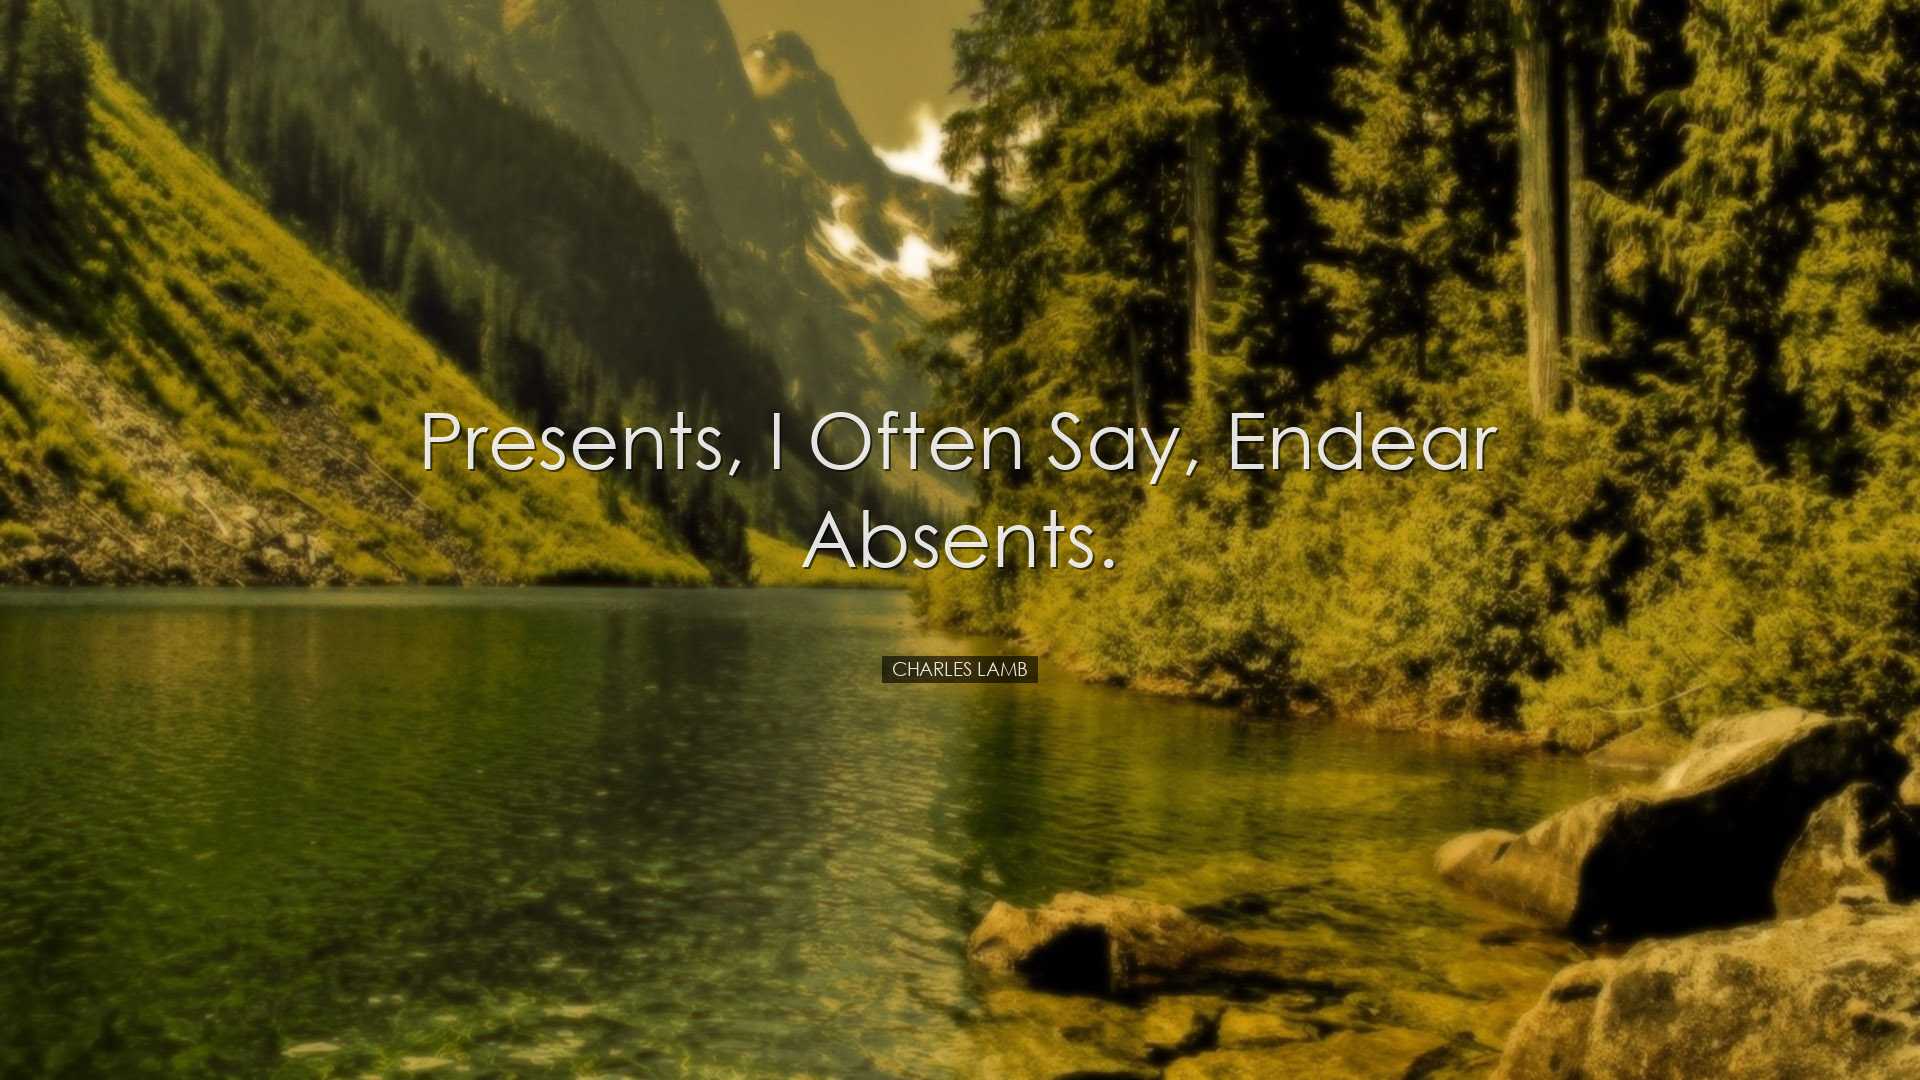 Presents, I often say, endear absents. - Charles Lamb